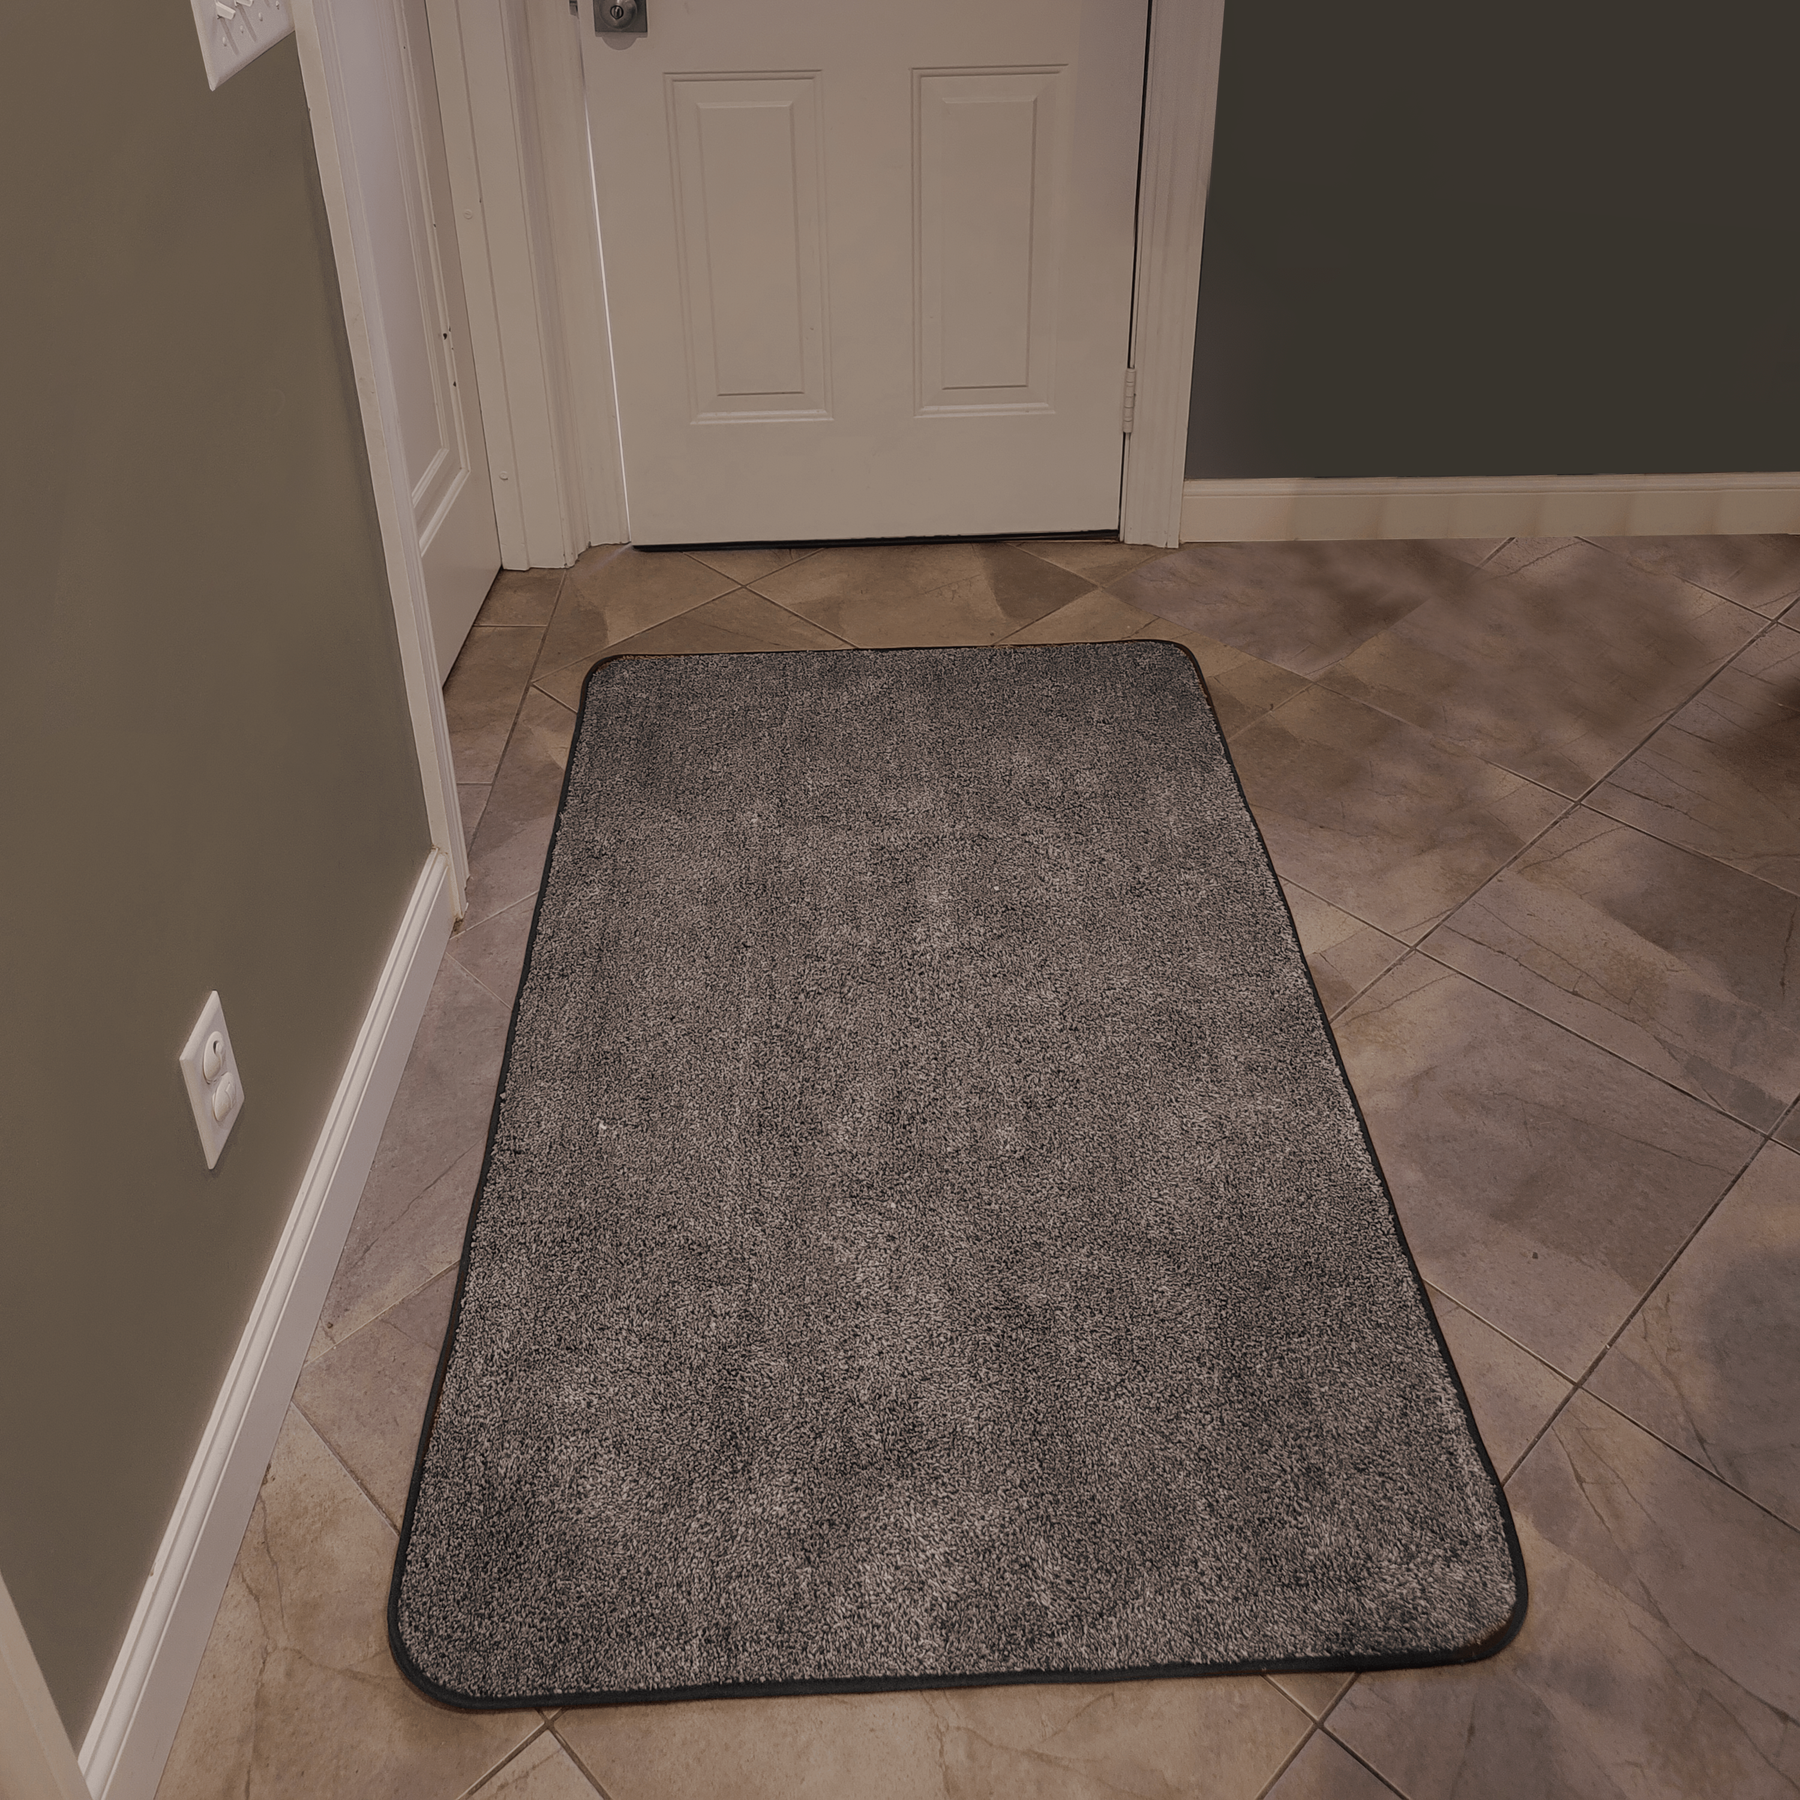 Keep Your Homes Dry This Monsoon With These High Absorbent Door Mats